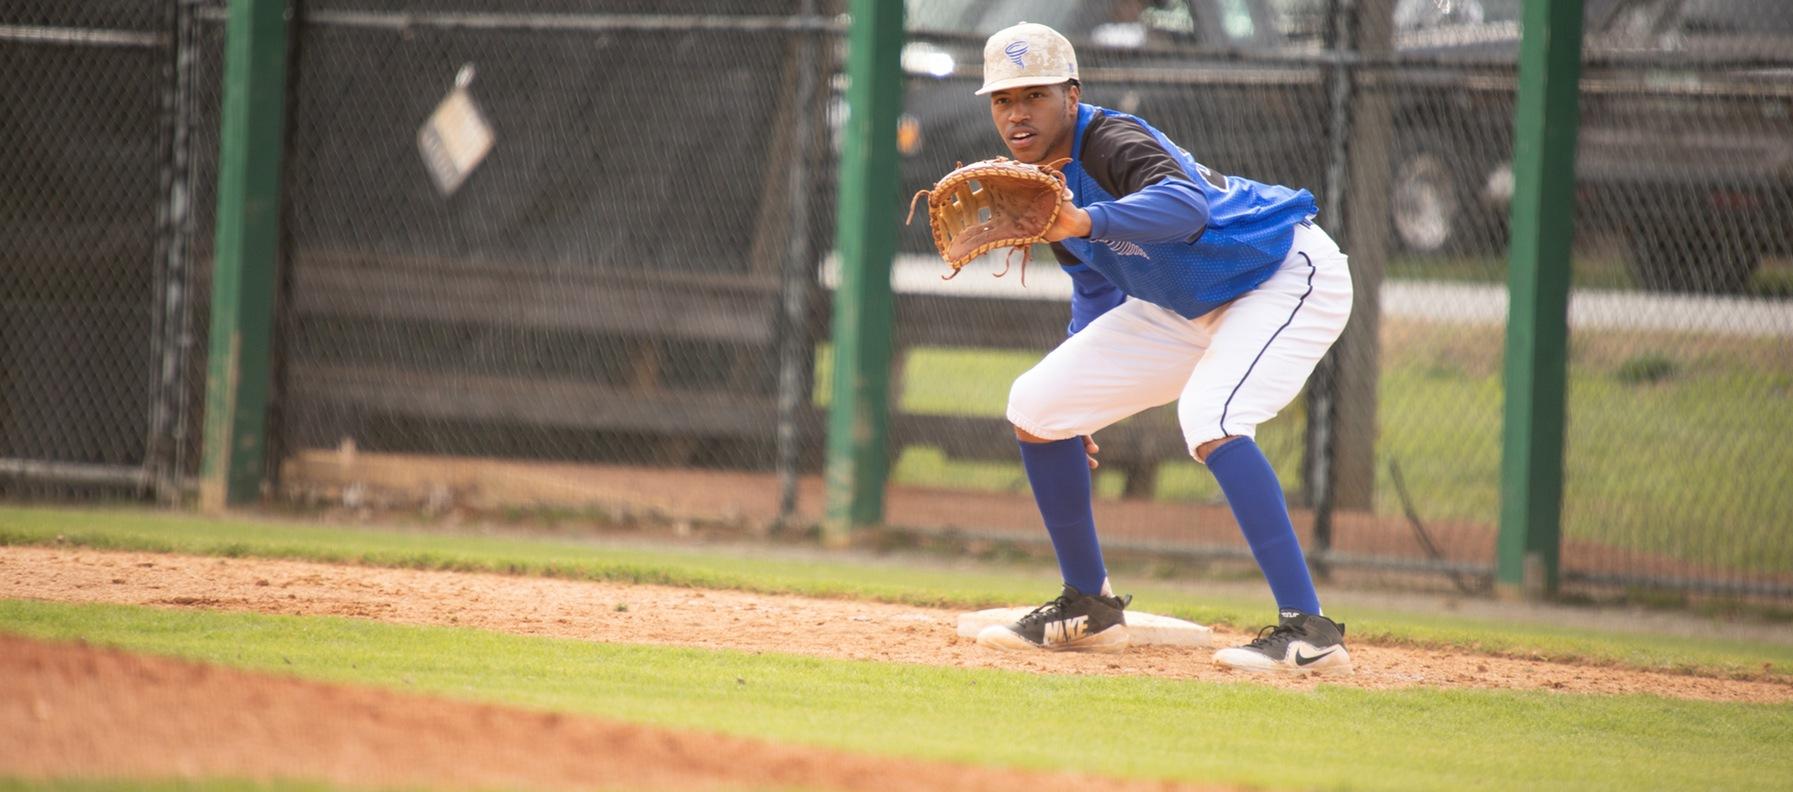 Brevard Drops Midweek Contest against Montreat at Big League Camp